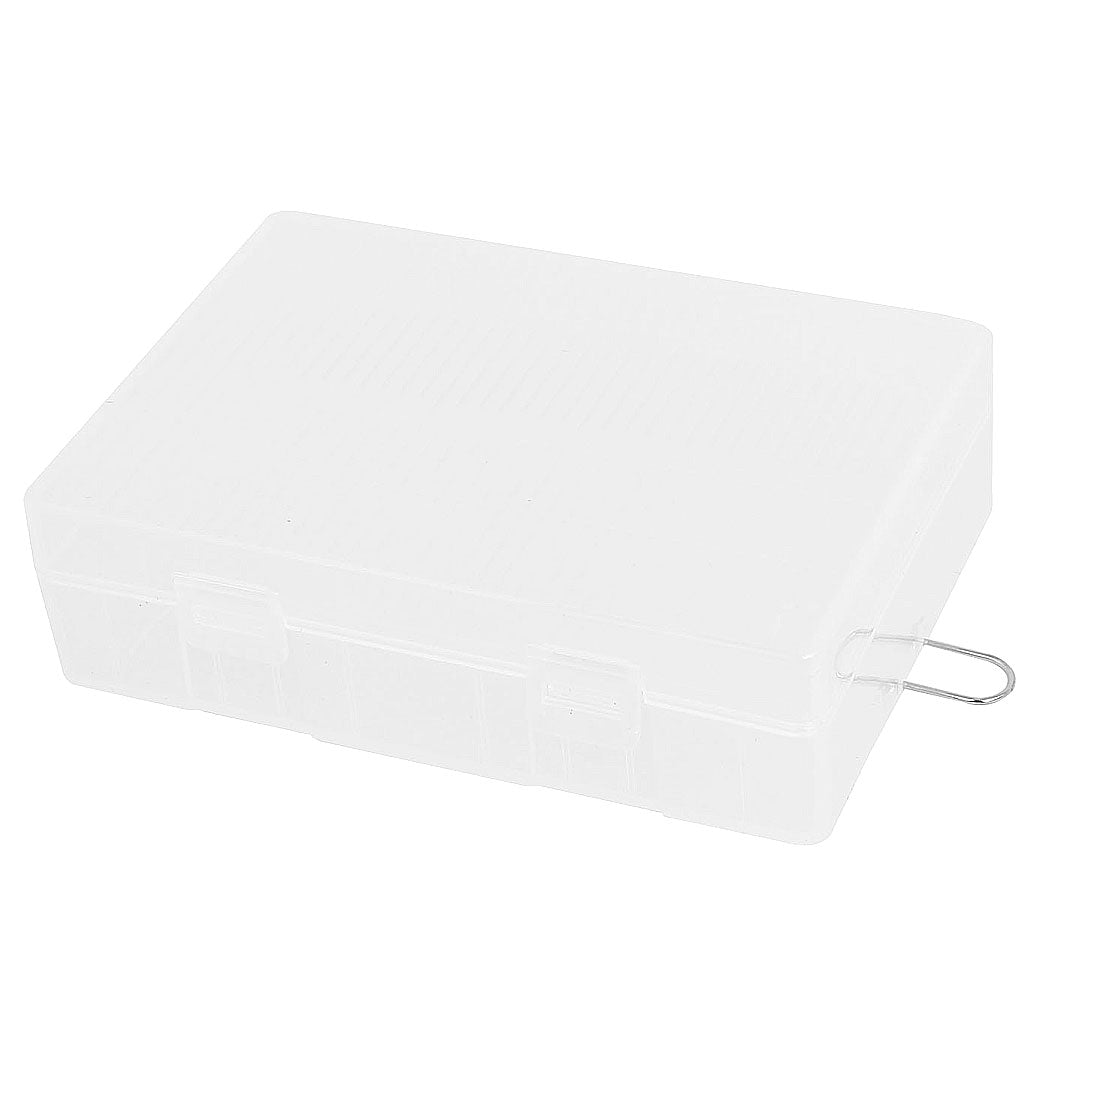 uxcell Uxcell Clear Rectangle Storage Box Case Container for 4 x Batteries 11 x 7.5 x 3cm